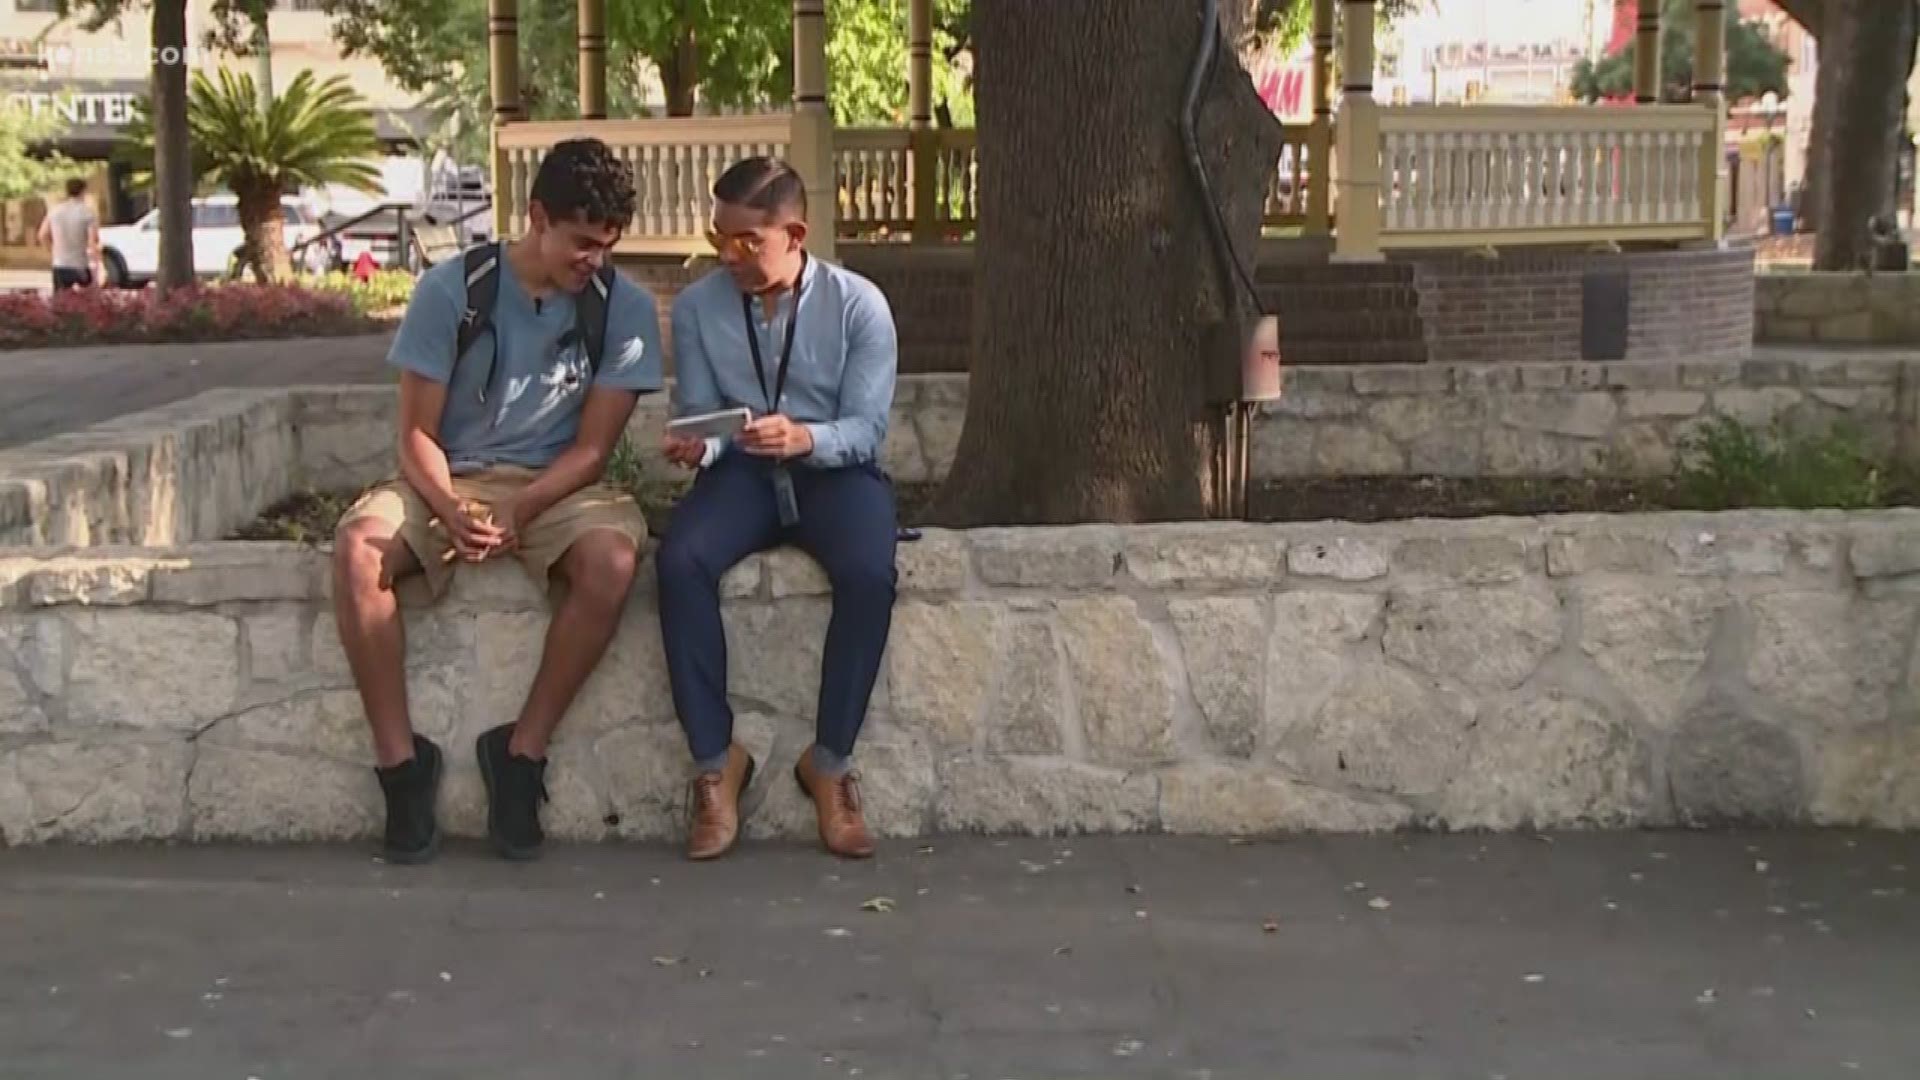 It was an unwanted sight outside one of the top tourist spots in the state. Eyewitness News reporter Henry Ramos is live at The Alamo.